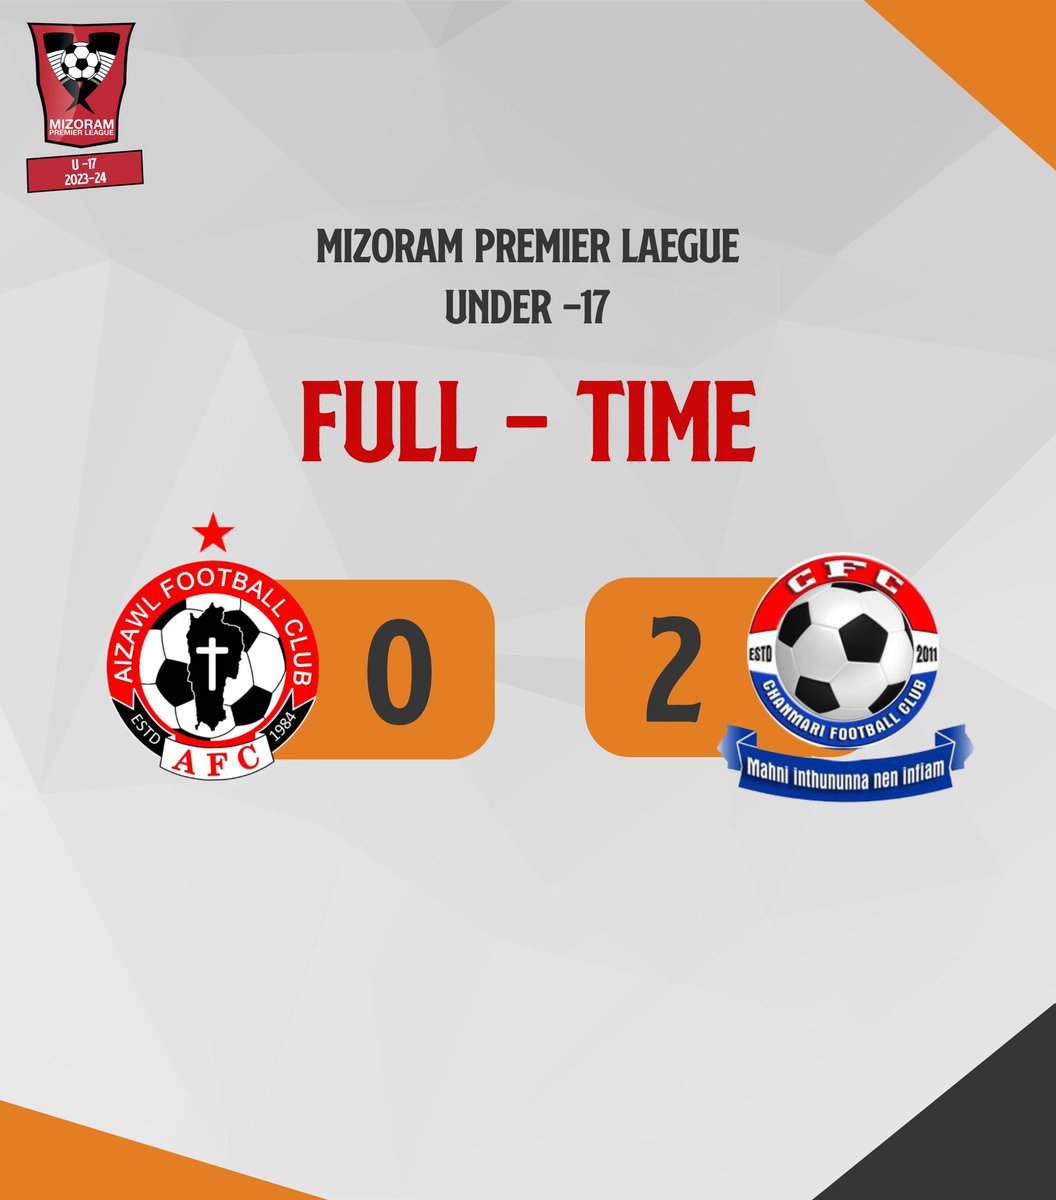 Full-Time at 1st BN MAP Ground, Armed Veng #AizawlFC #ThePeoplesClub #WeAreAFC